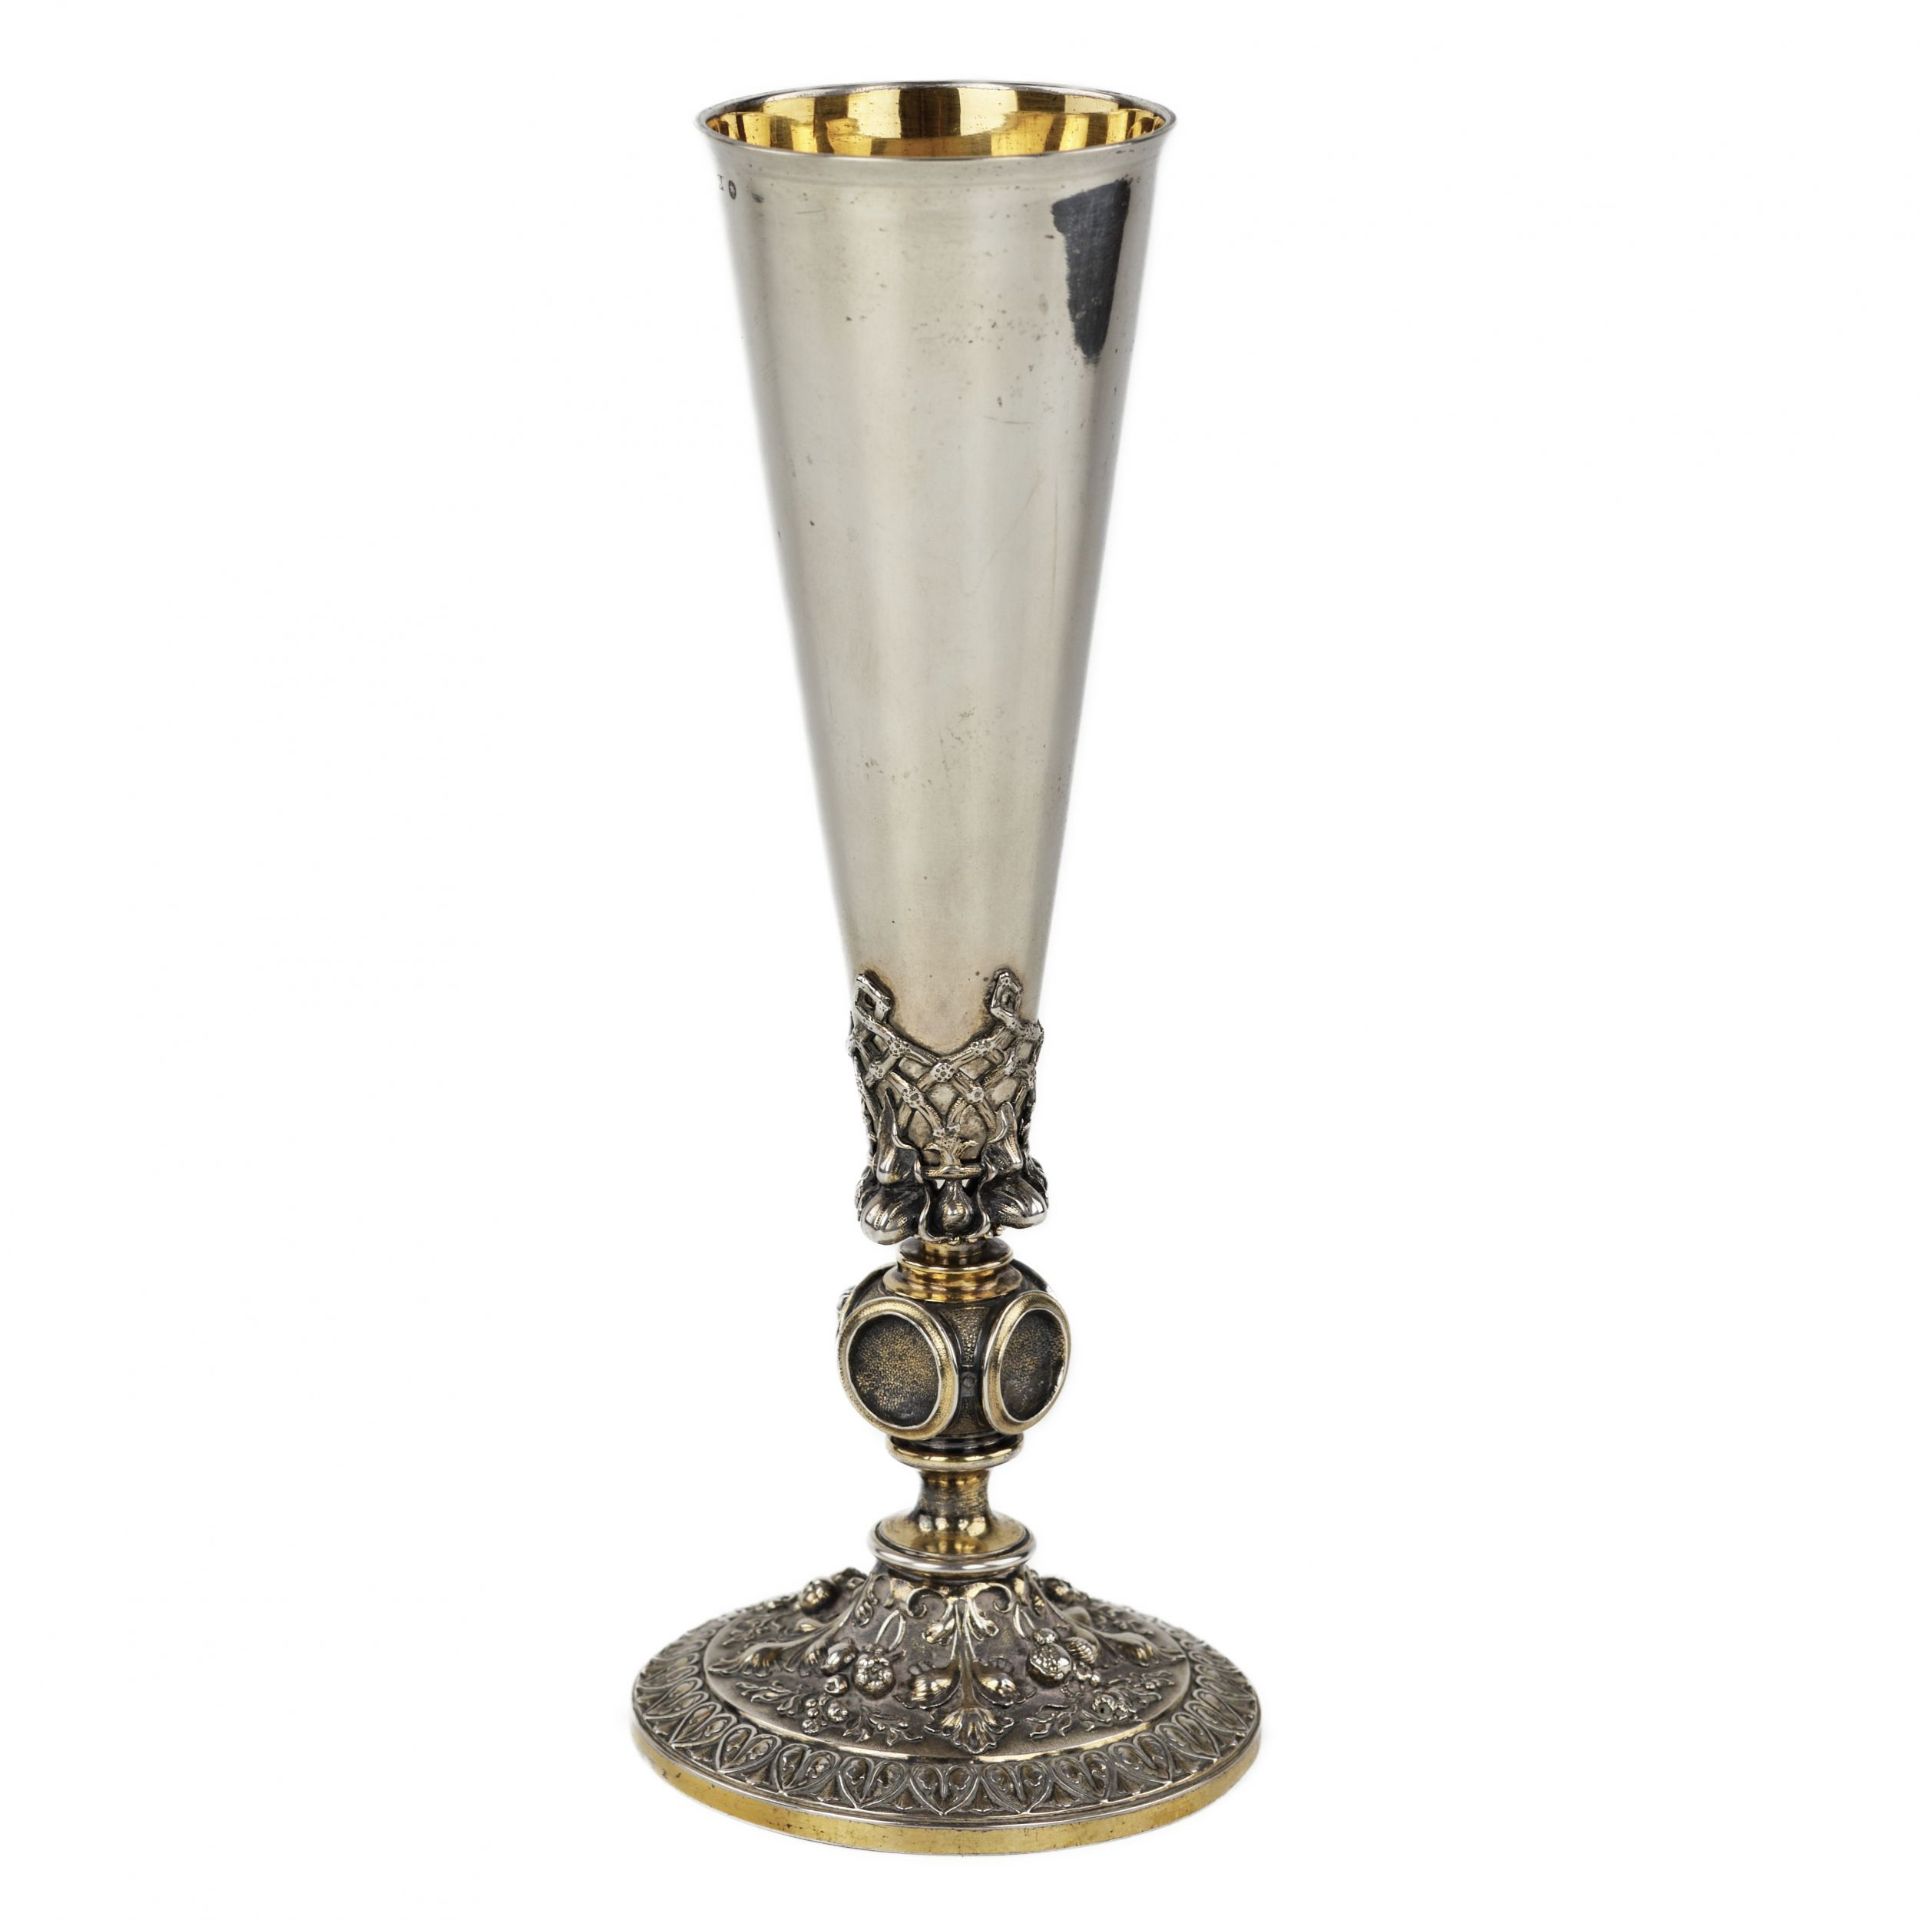 Gilded silver goblet. St. Petersburg, 84 samples, late 19th century. - Image 3 of 10